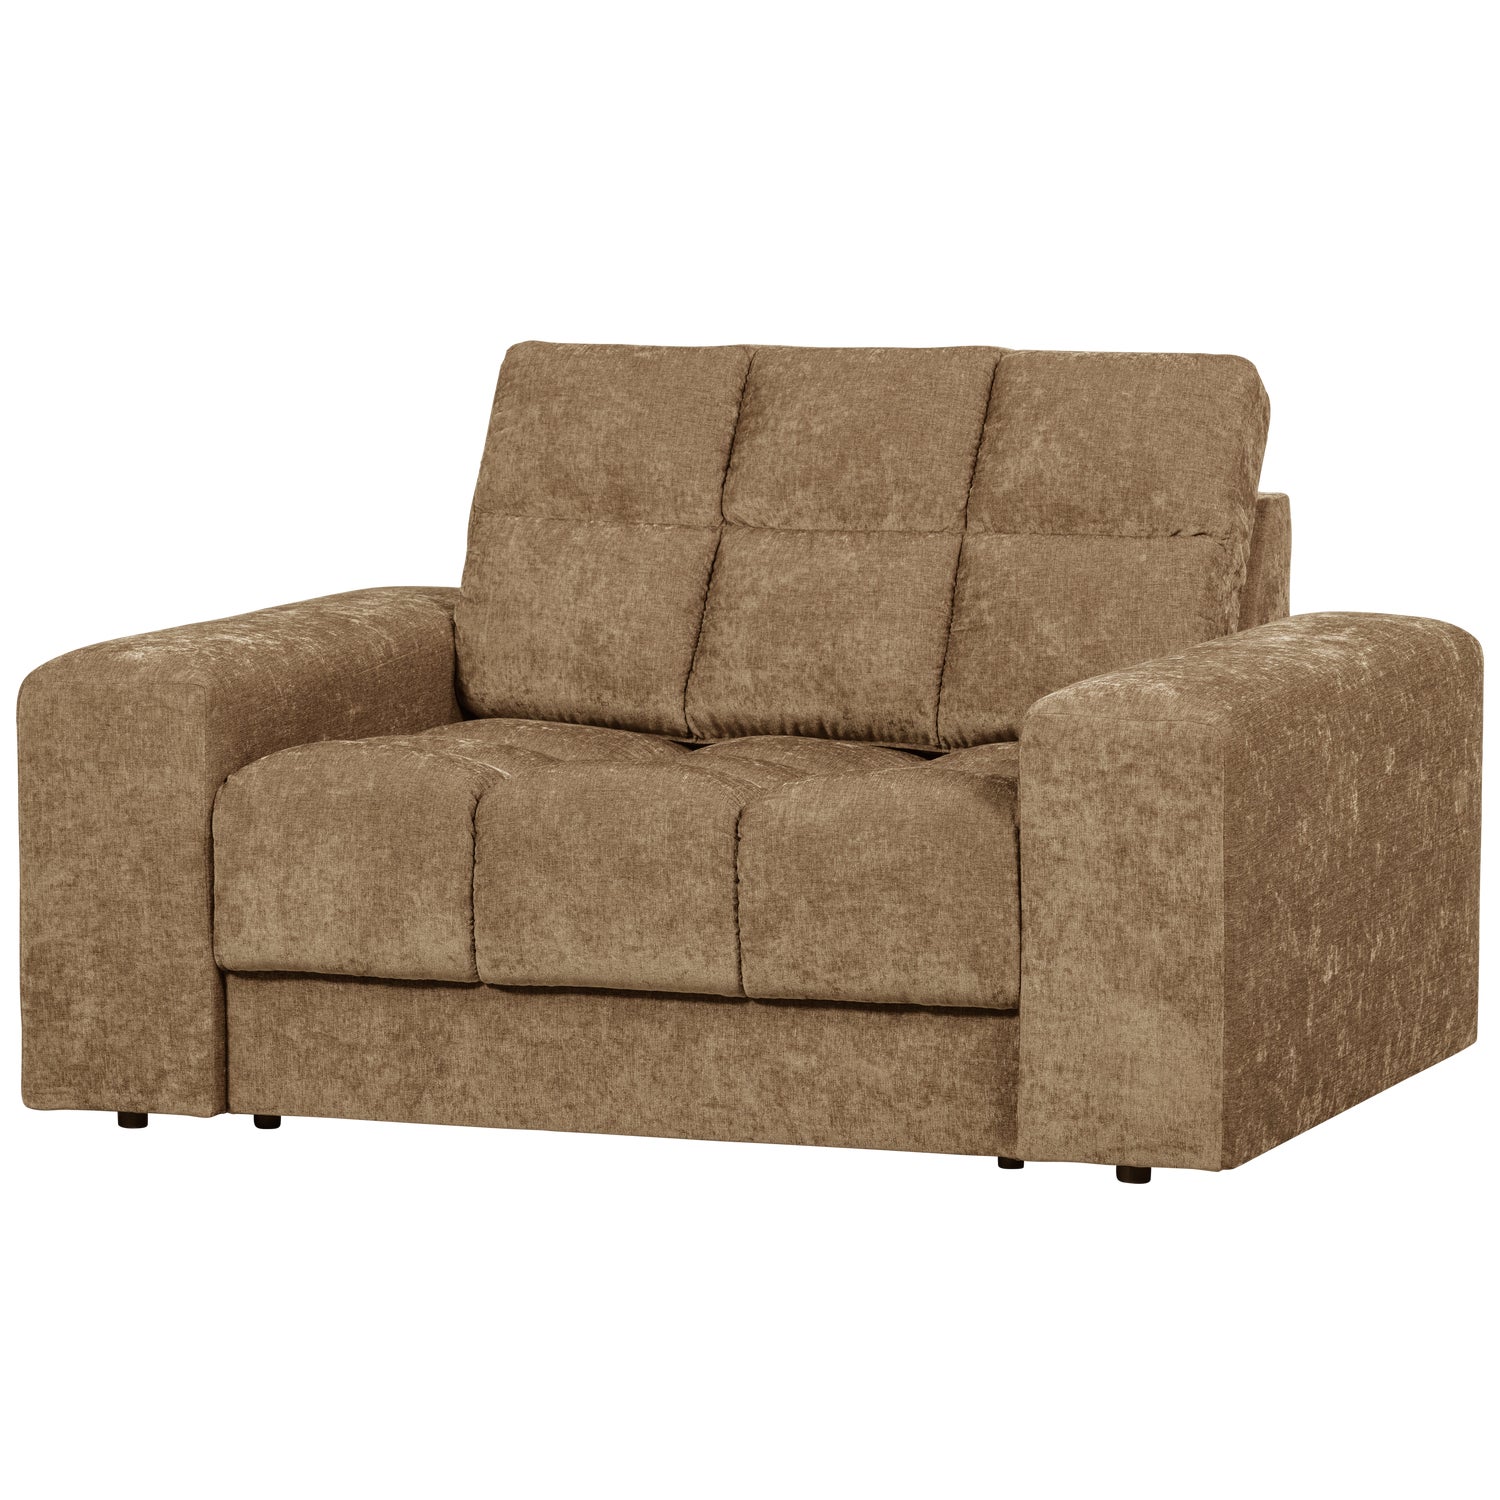 379006-Z-02_VS_WE_Second_date_loveseat_vintage_zand_SA.png?auto=webp&format=png&width=1500&height=1500